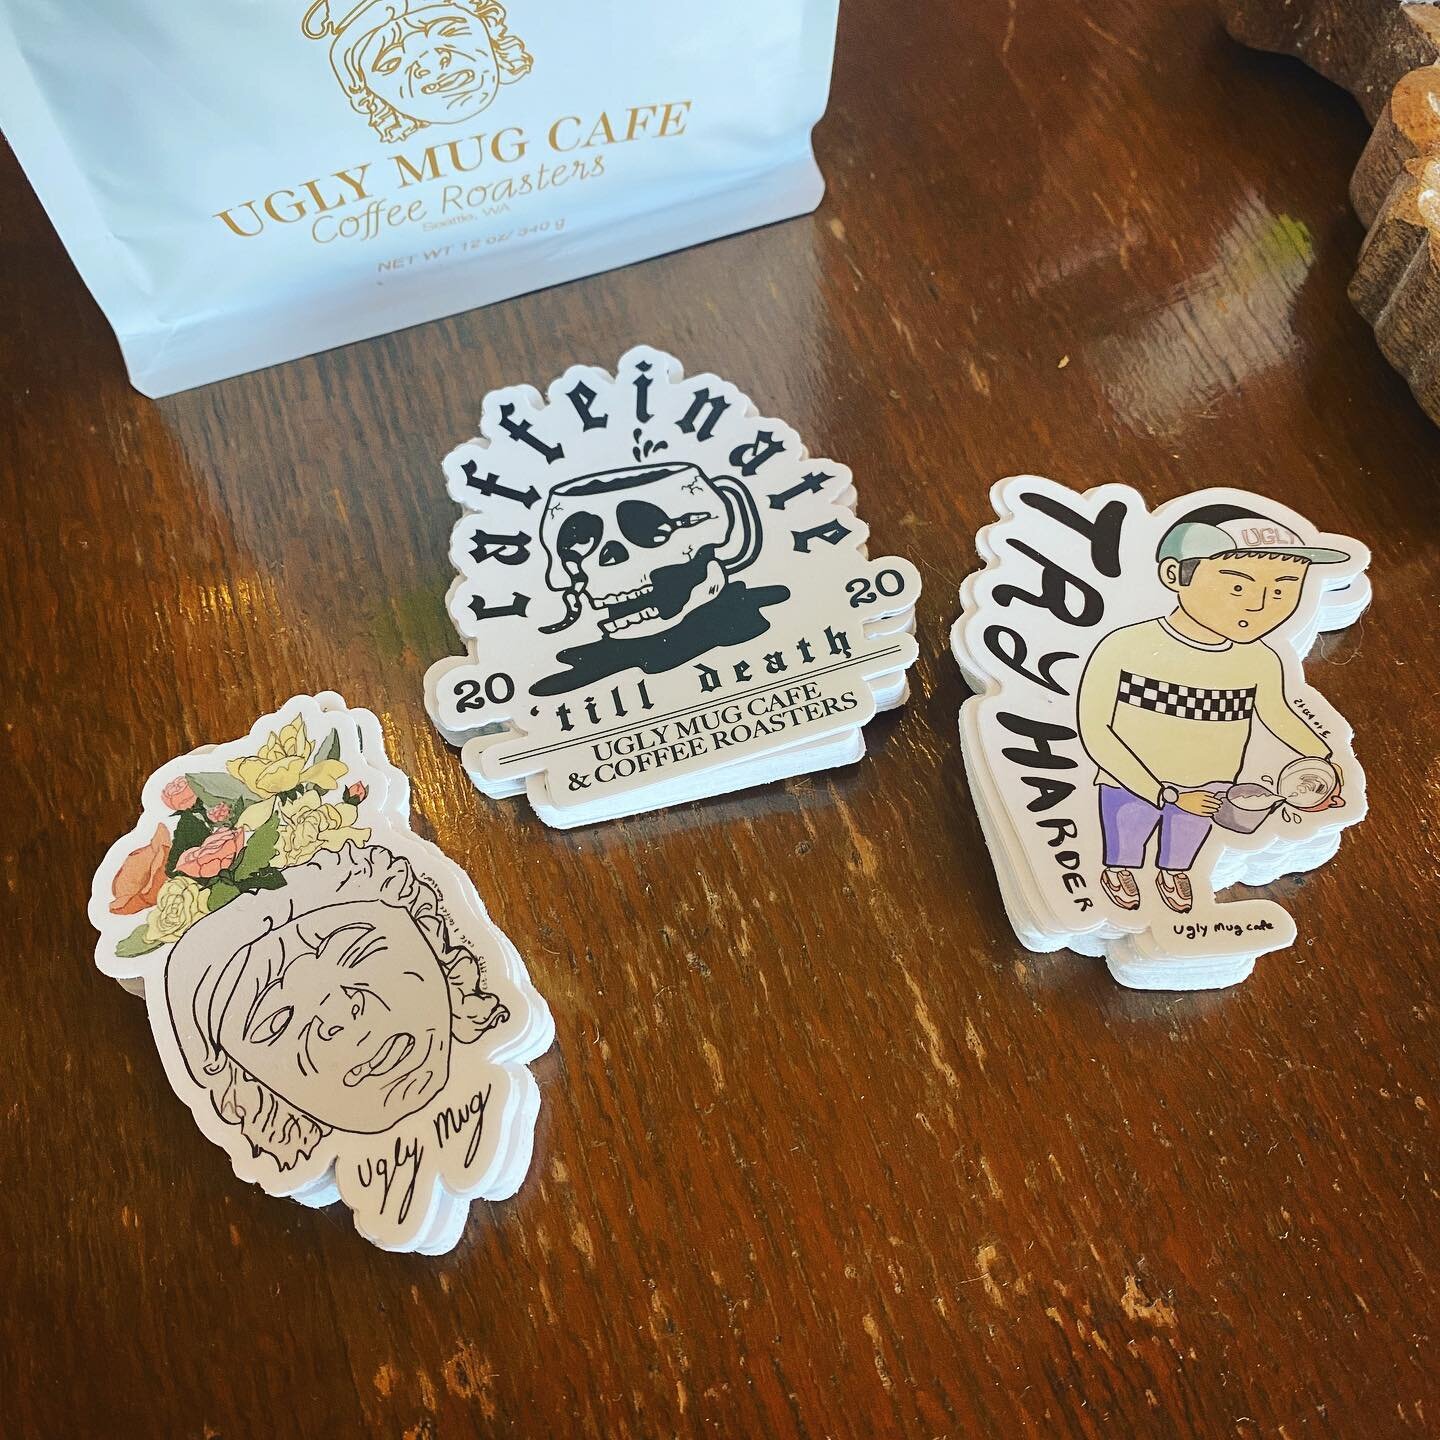 Yay! New stickers! Our in house designed stickers are available at both locations! Our baristas designed this and we share profit with them! Cool huh!? 🙋